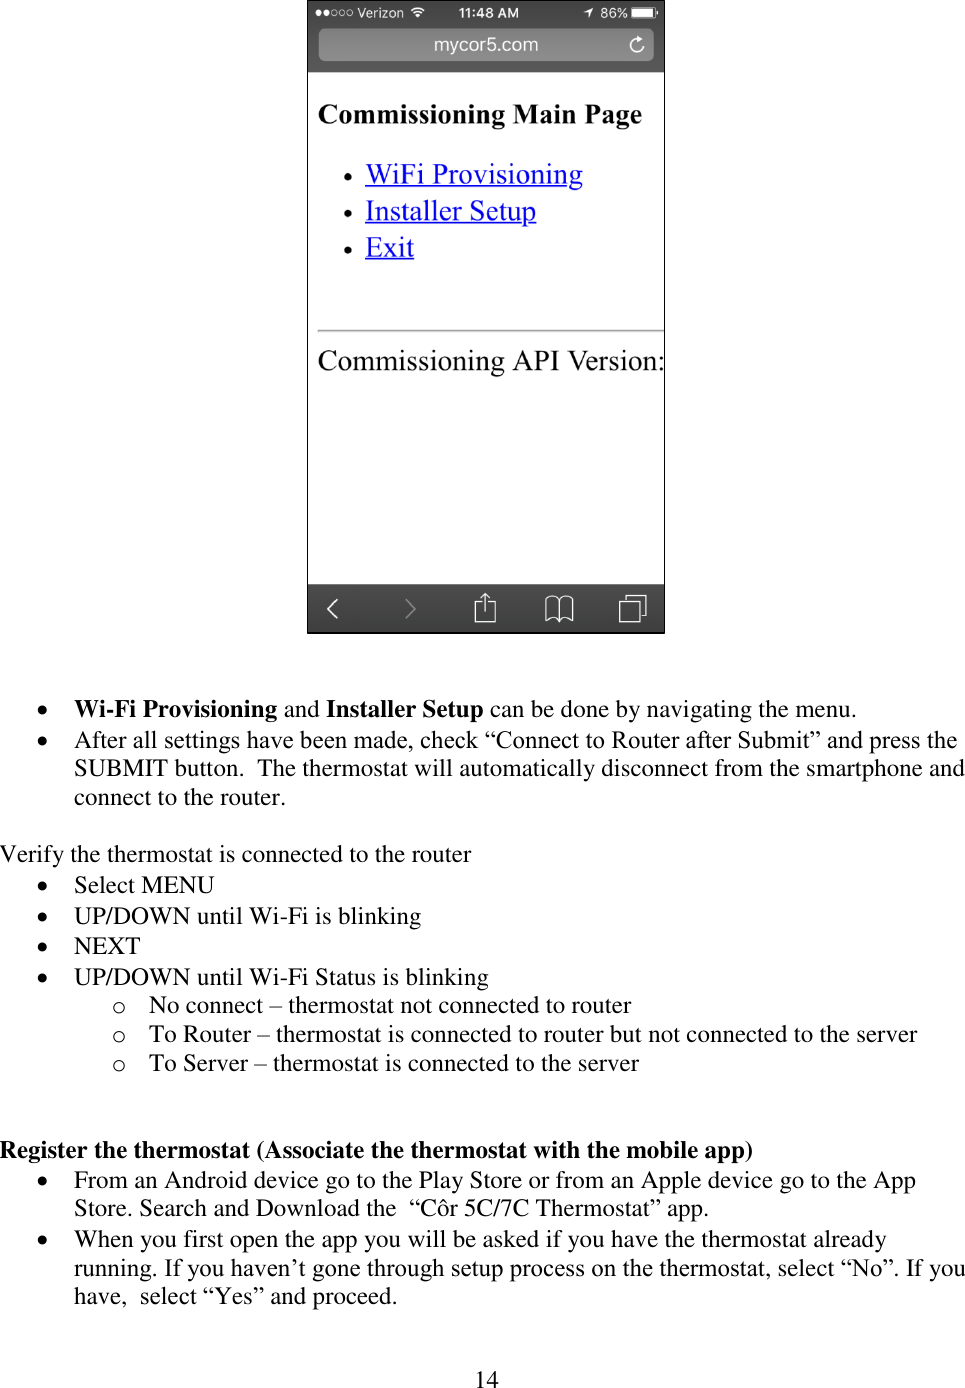 14      Wi-Fi Provisioning and Installer Setup can be done by navigating the menu.  After all settings have been made, check “Connect to Router after Submit” and press the SUBMIT button.  The thermostat will automatically disconnect from the smartphone and connect to the router.  Verify the thermostat is connected to the router  Select MENU    UP/DOWN until Wi-Fi is blinking    NEXT    UP/DOWN until Wi-Fi Status is blinking o No connect – thermostat not connected to router o To Router – thermostat is connected to router but not connected to the server o To Server – thermostat is connected to the server    Register the thermostat (Associate the thermostat with the mobile app)  From an Android device go to the Play Store or from an Apple device go to the App Store. Search and Download the  “Côr 5C/7C Thermostat” app.  When you first open the app you will be asked if you have the thermostat already running. If you haven’t gone through setup process on the thermostat, select “No”. If you have,  select “Yes” and proceed. 